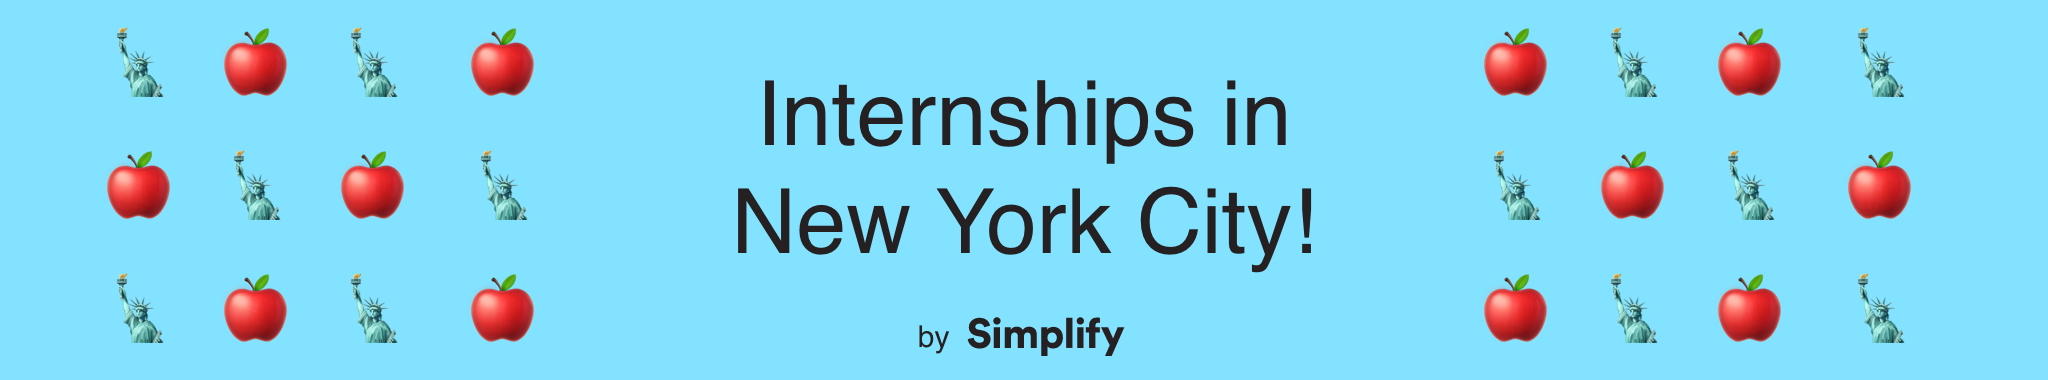 text that says “Internships in New York City” surrounded by apple and statue of liberty emojis